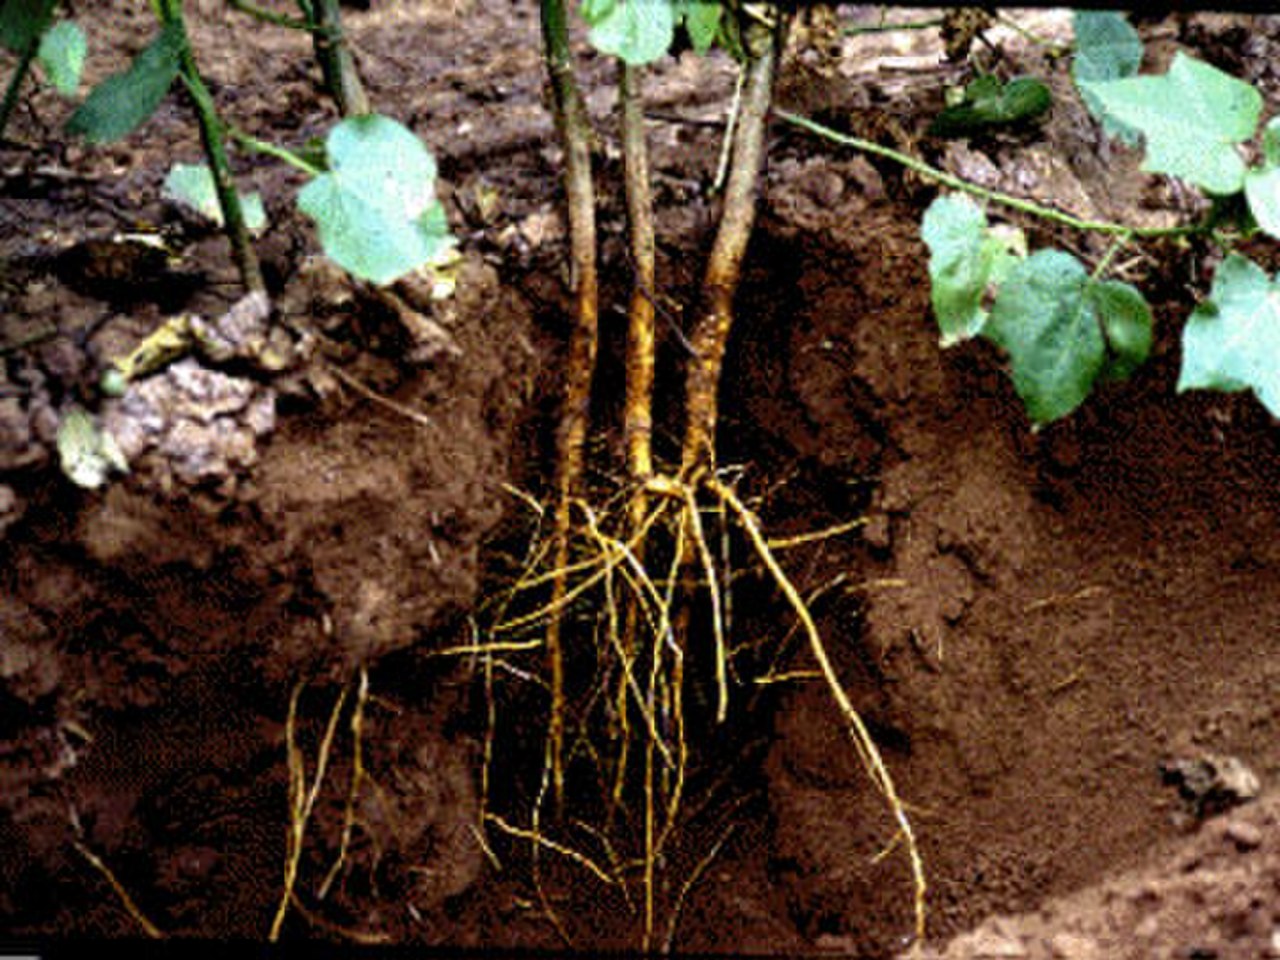 how do plants absorb nutrients from the soil and what makes sap rise and flow in a tree